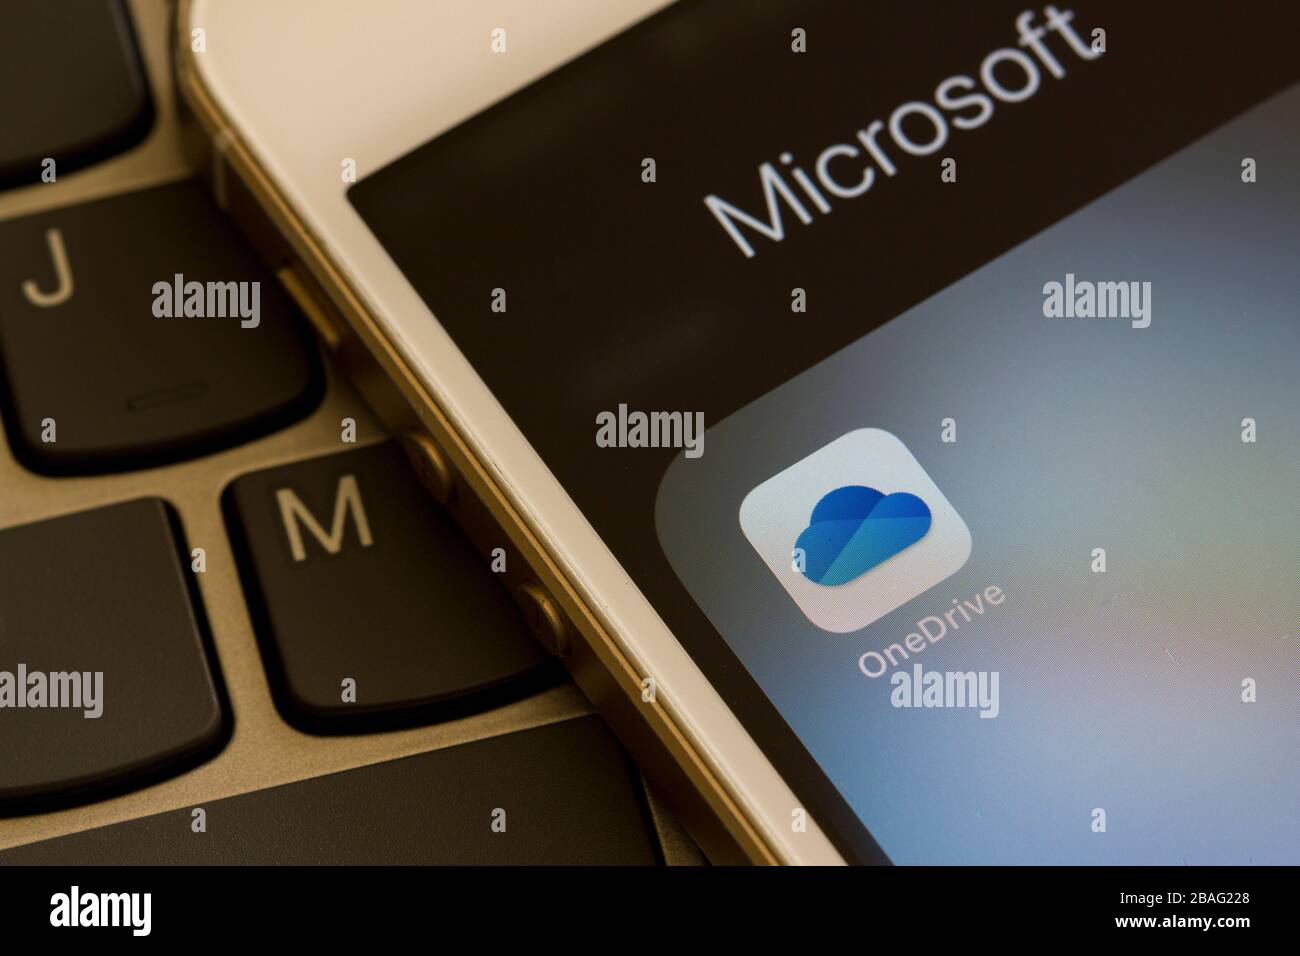 Microsoft OneDrive mobile app icon is seen on a smartphone. OneDrive is Microsoft's personal cloud storage service solution for file hosting. Stock Photo